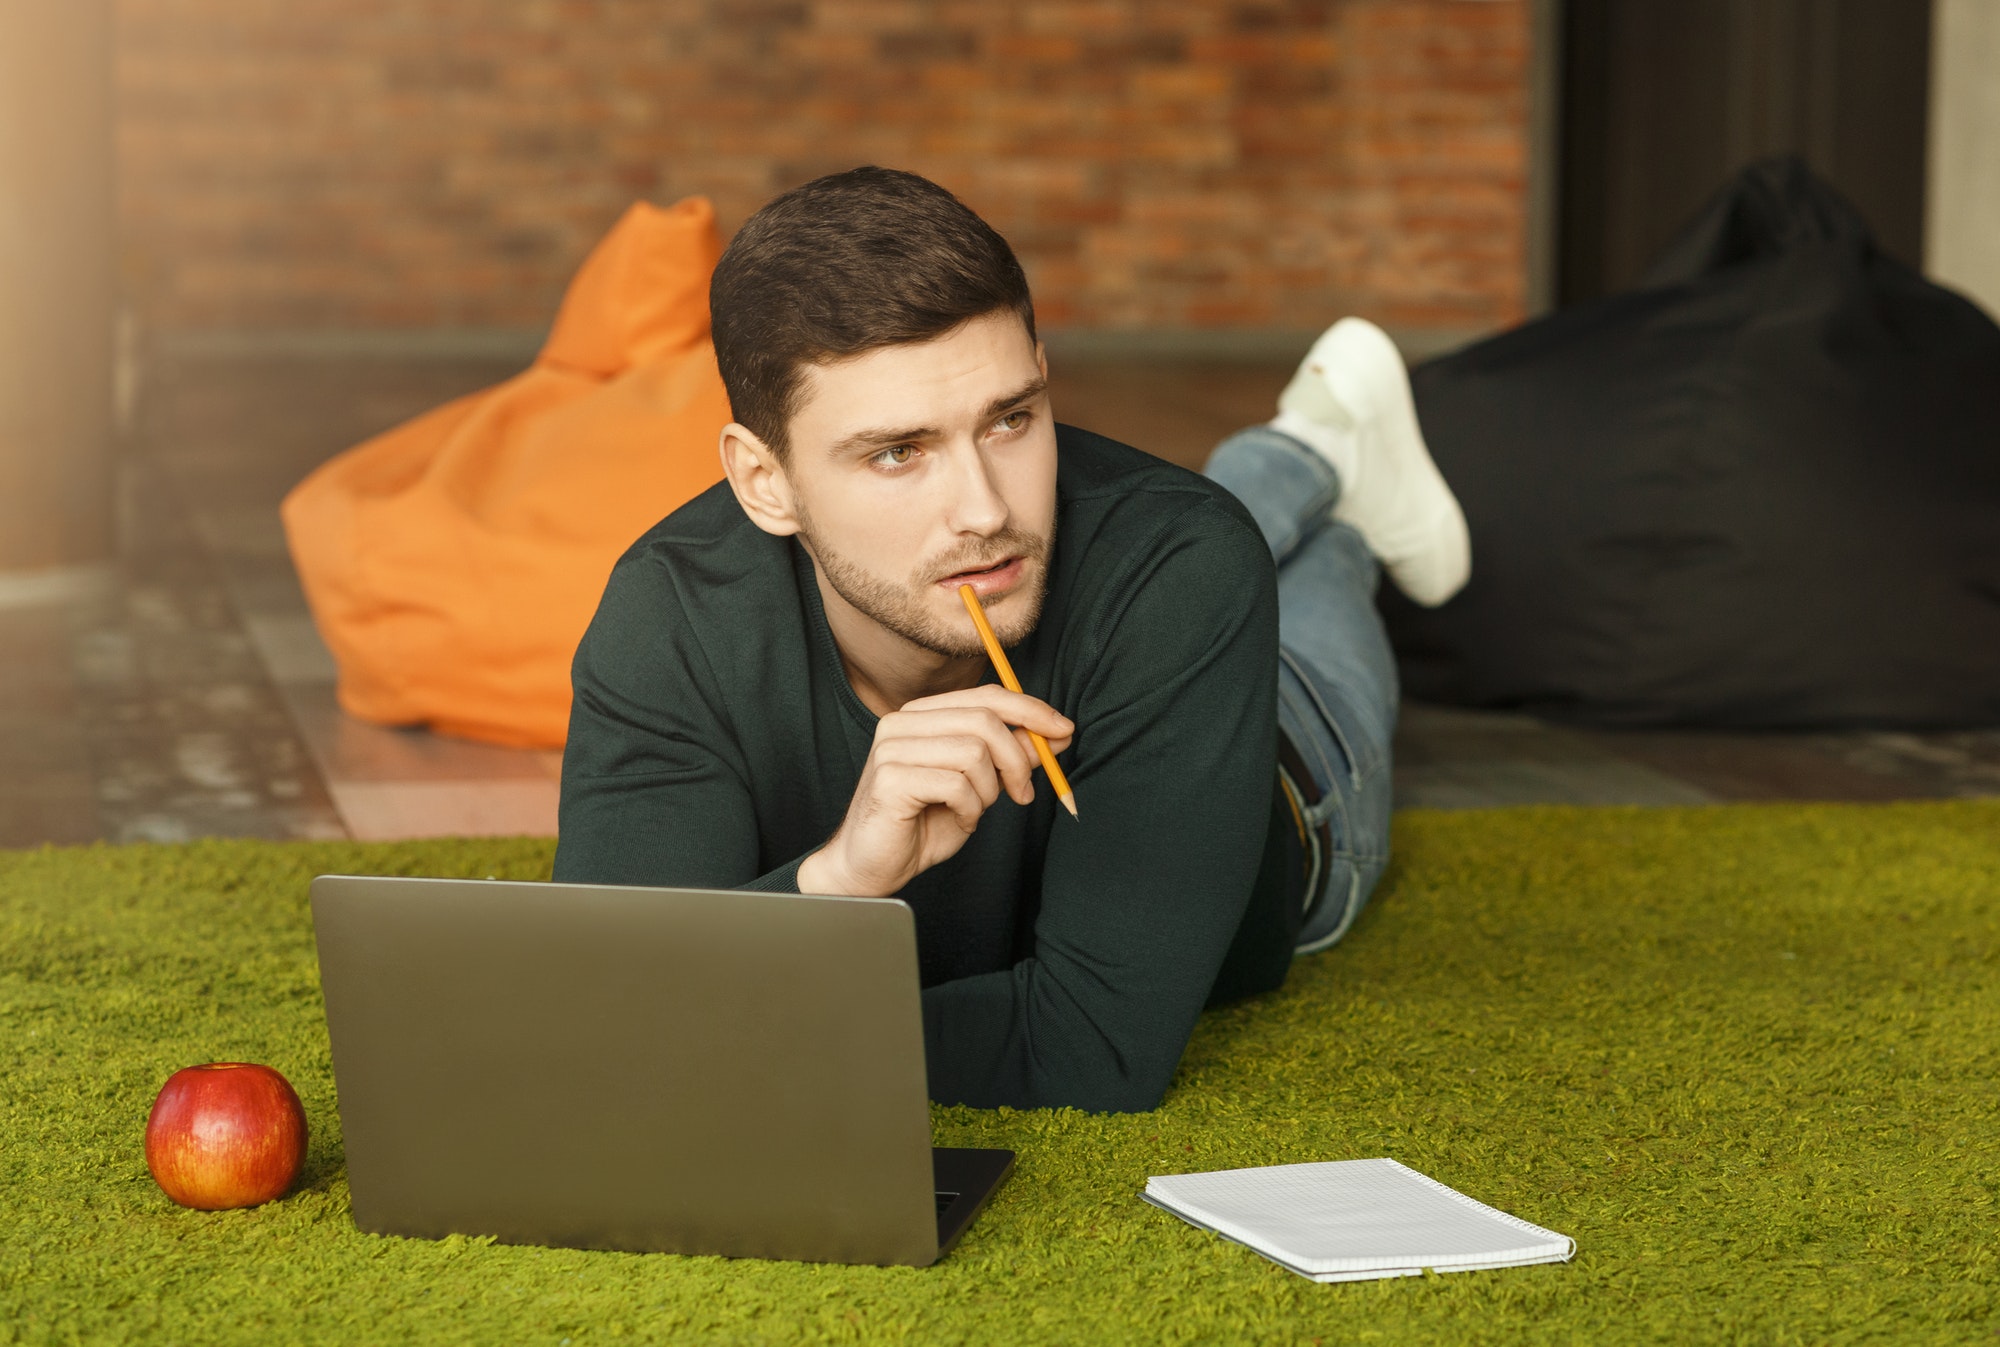 Guy Using Laptop Thinking Lying On Floor In Coworking Workspace